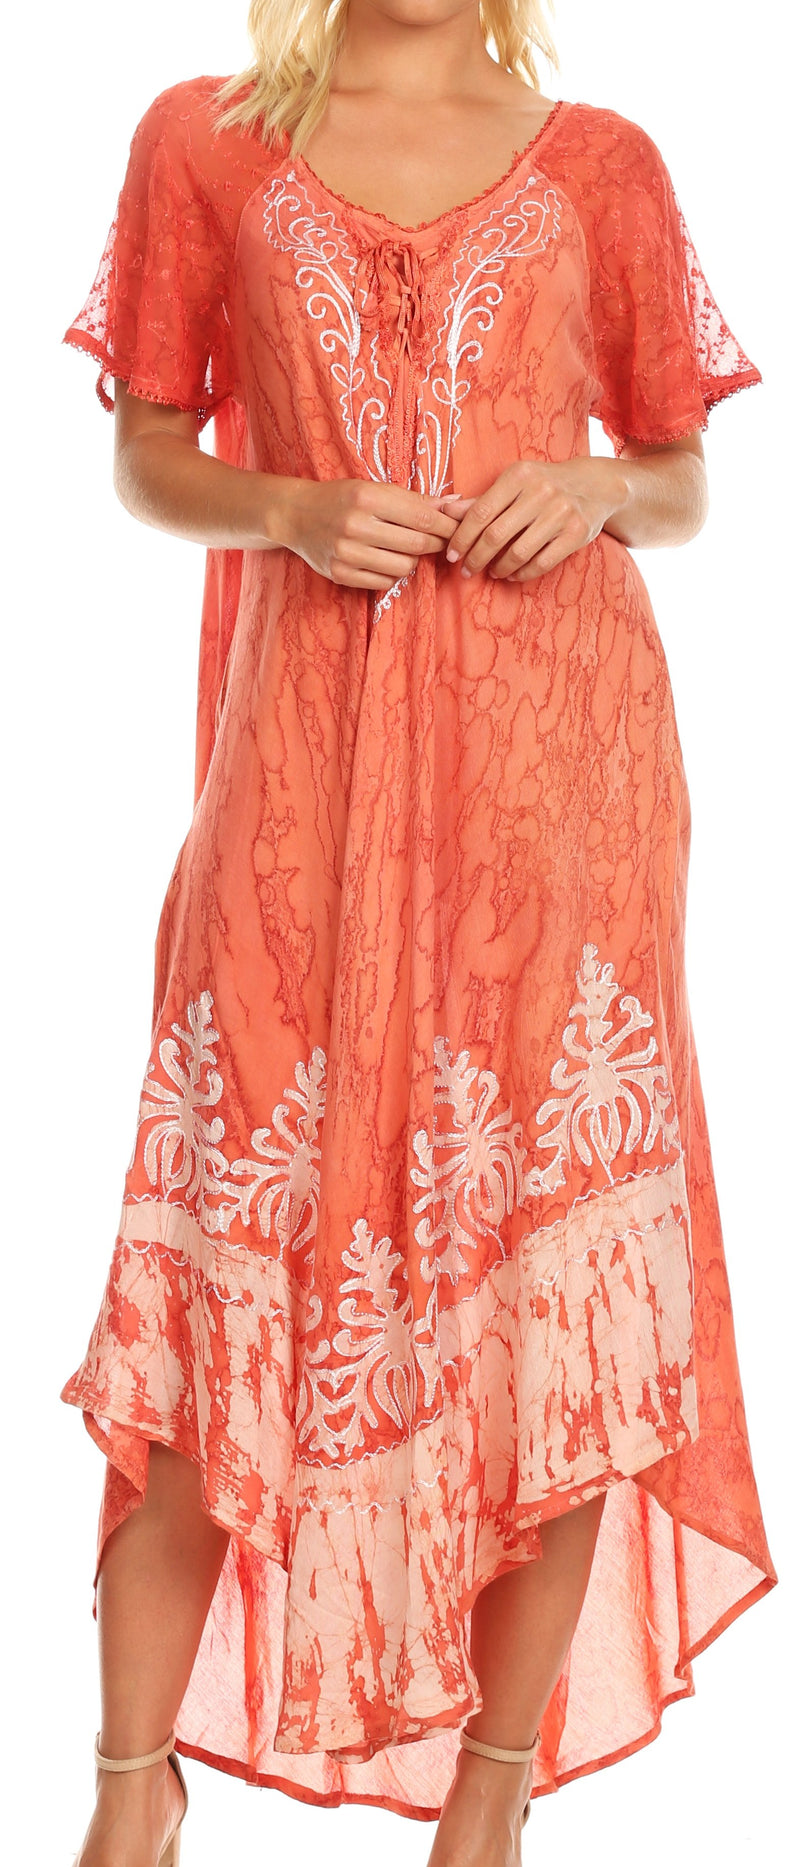 Sakkas Ronny Lace Embroidered Cap Sleeve Tie Dye Wash Caftan Dress / Cover Up